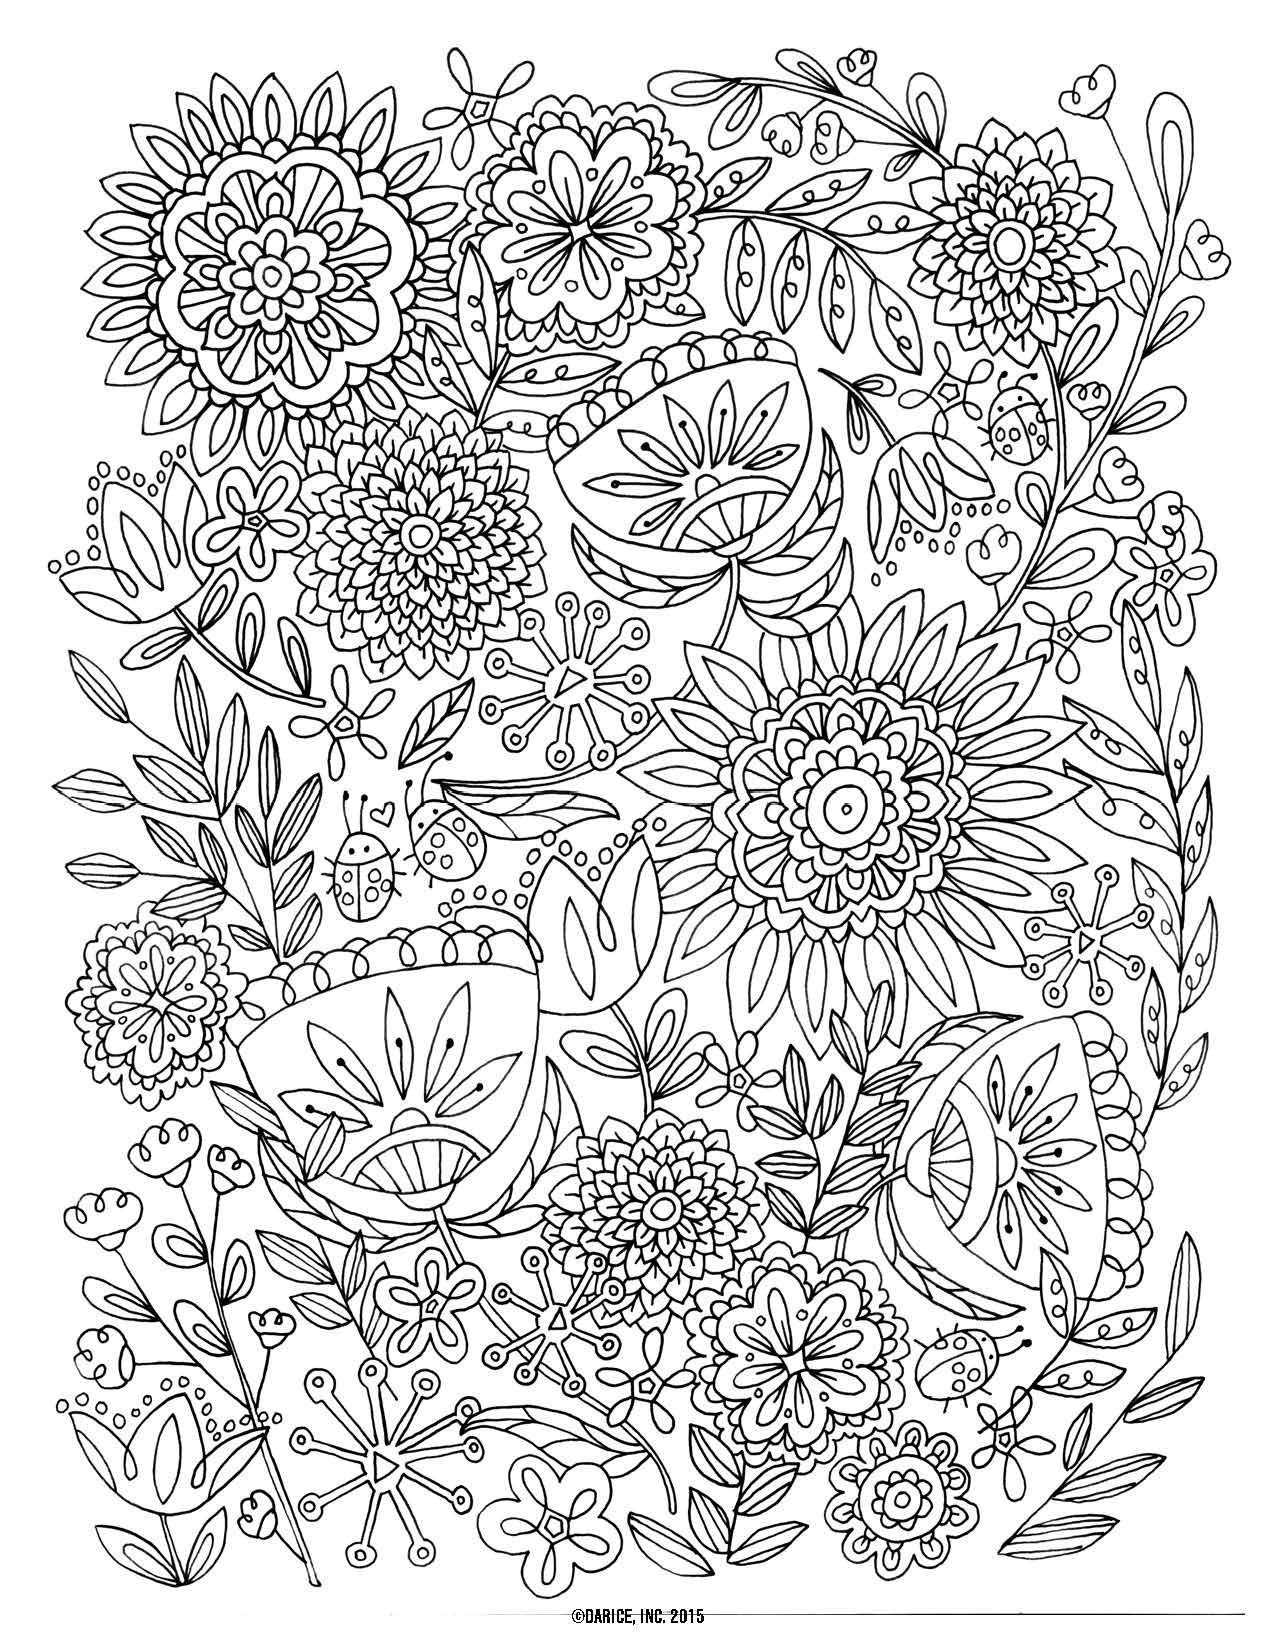 Recycling Worksheets for Kids Along with Recycling Coloring Pages New Seashell Template Unique Recycling